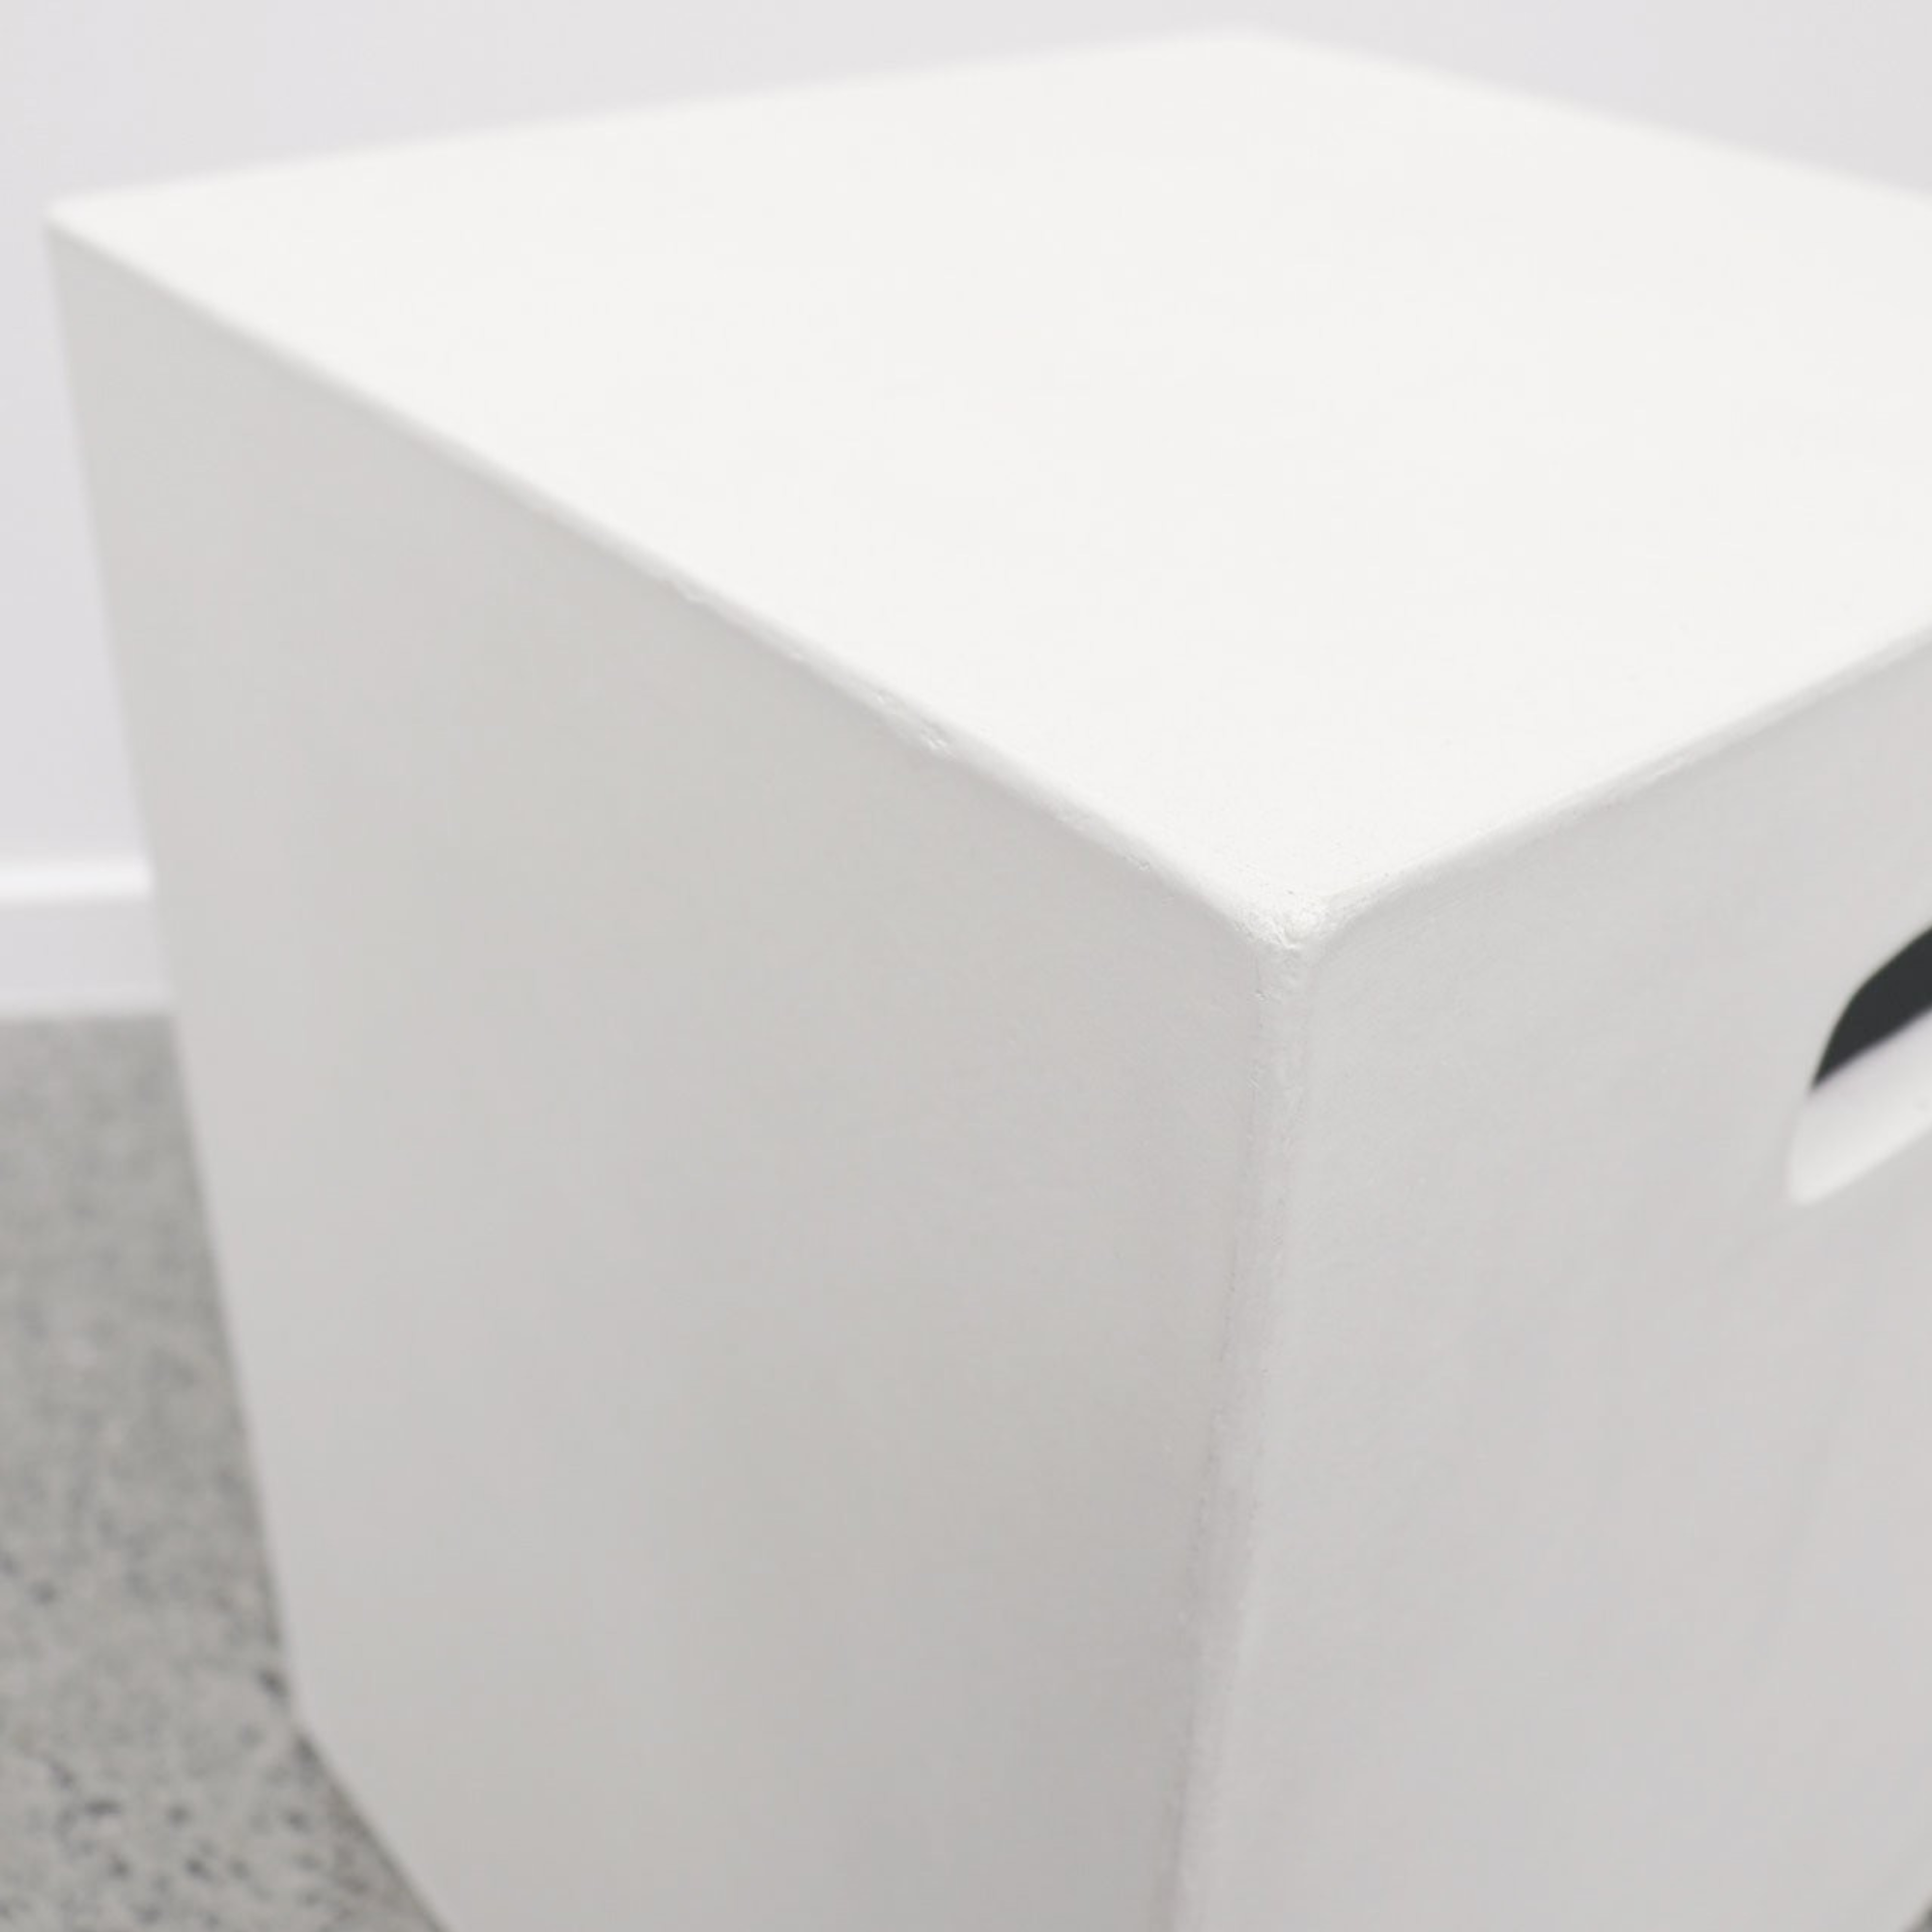 WHITE CONCRETE RECTANGLE SIDE TABLE | STOOL